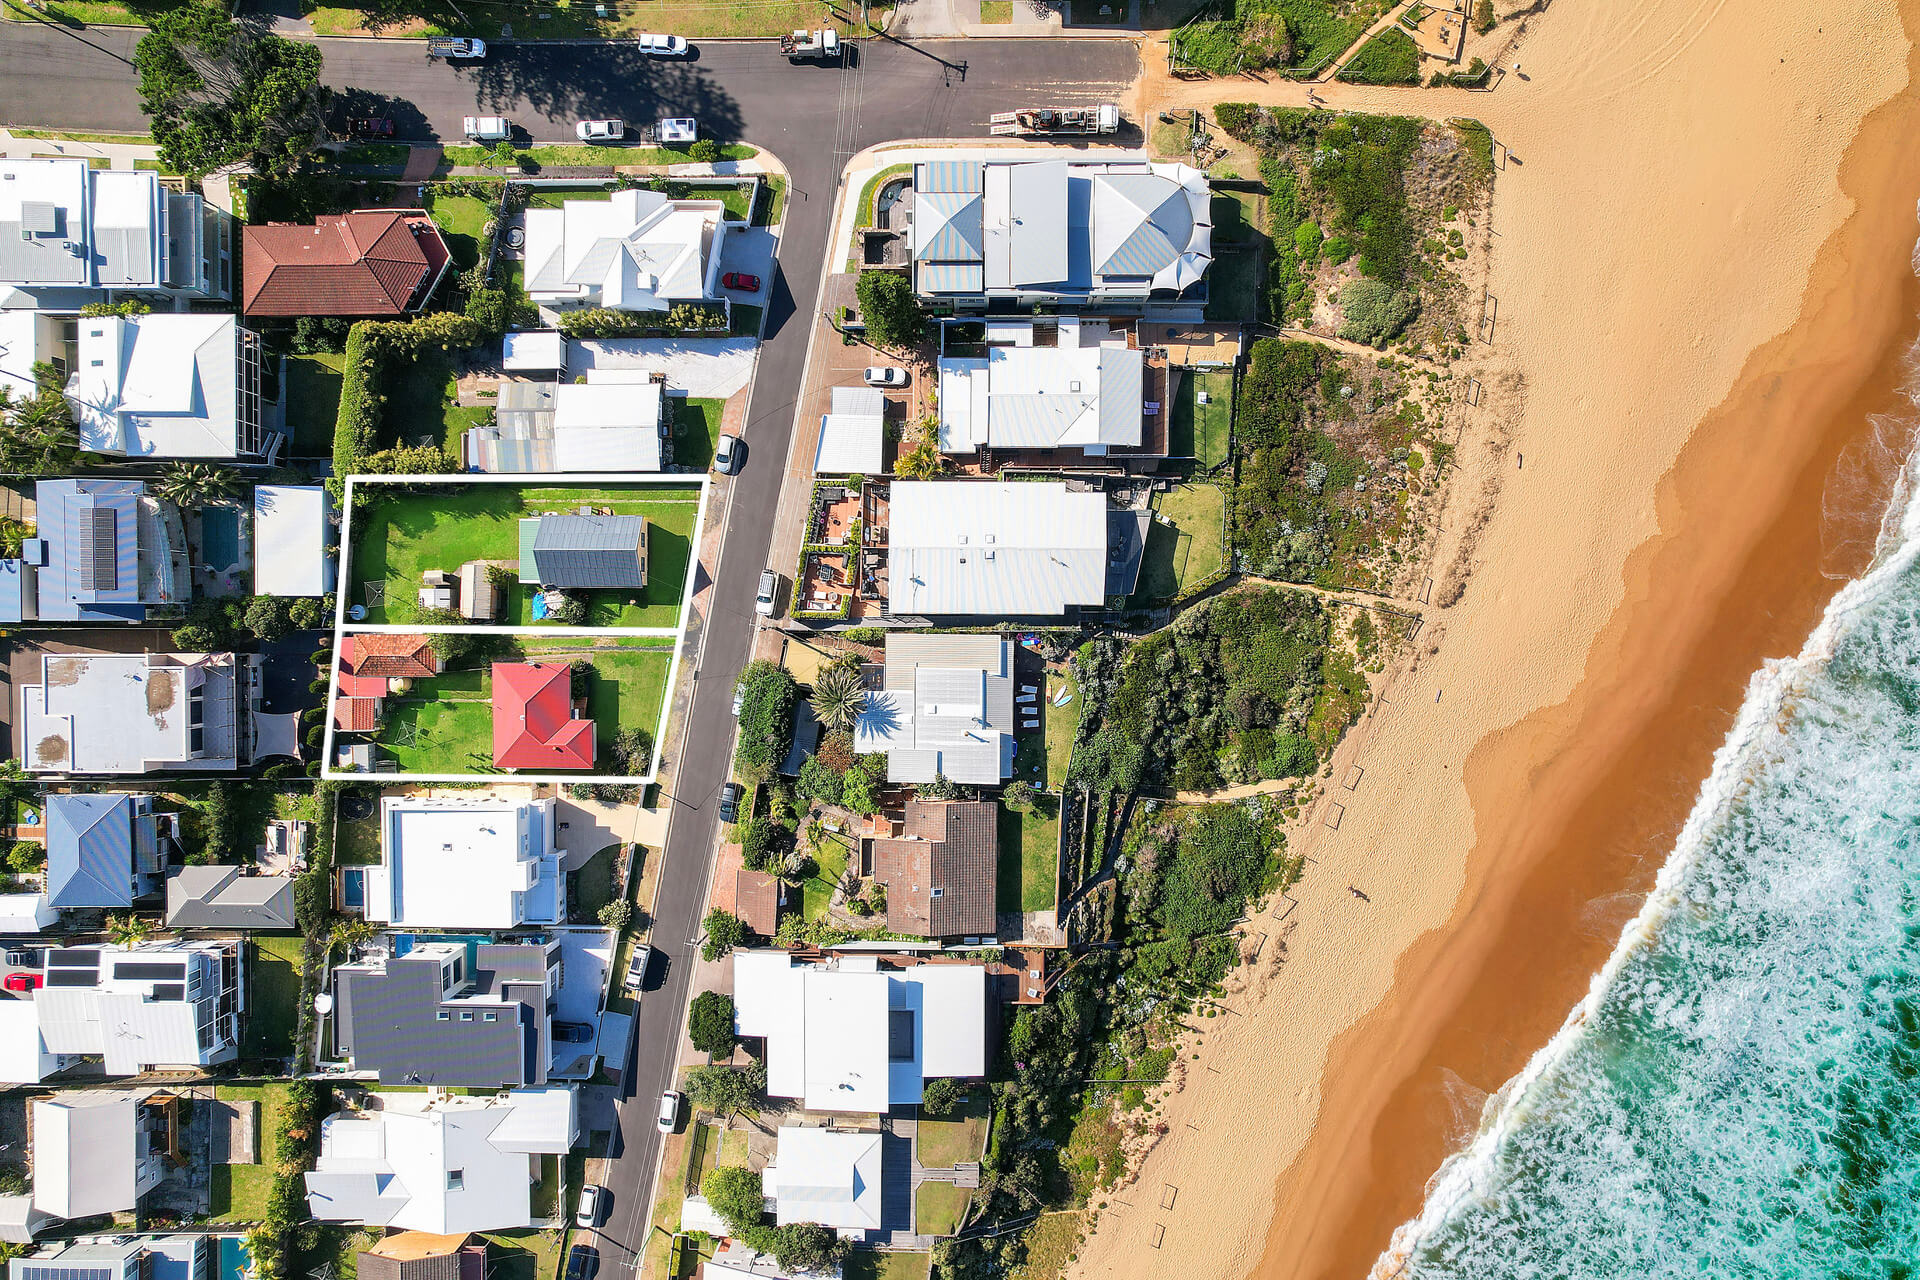 DiJones Central Coast sells some of the last untouched homes at Wamberal Beach